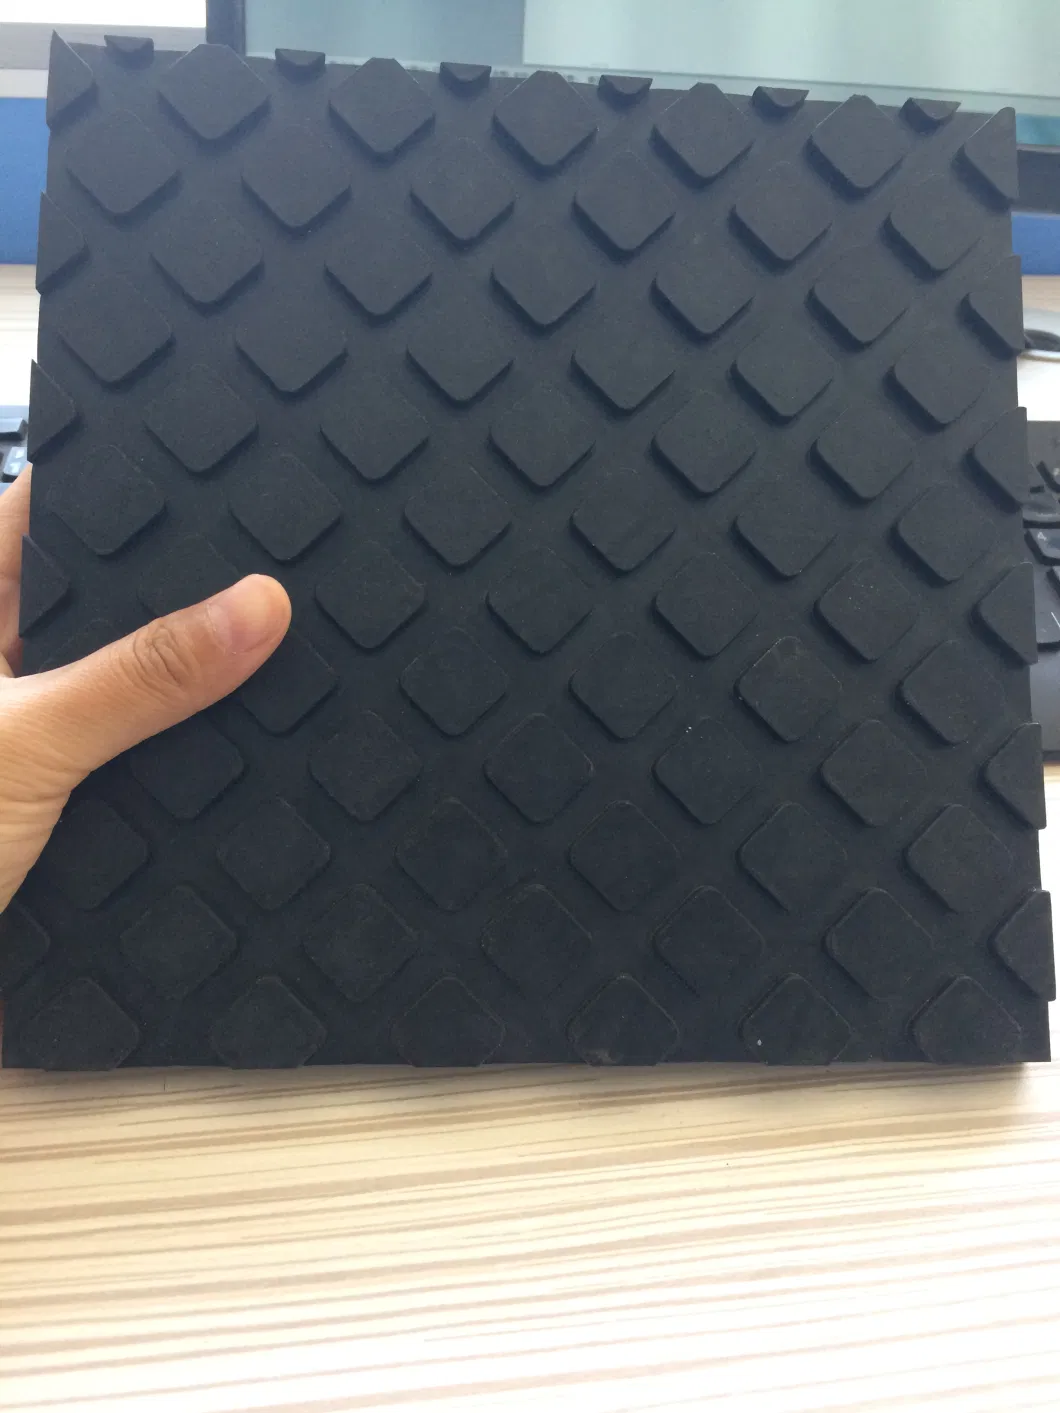 Easy Cleaning Wear Resistant Rubber Cow Mat